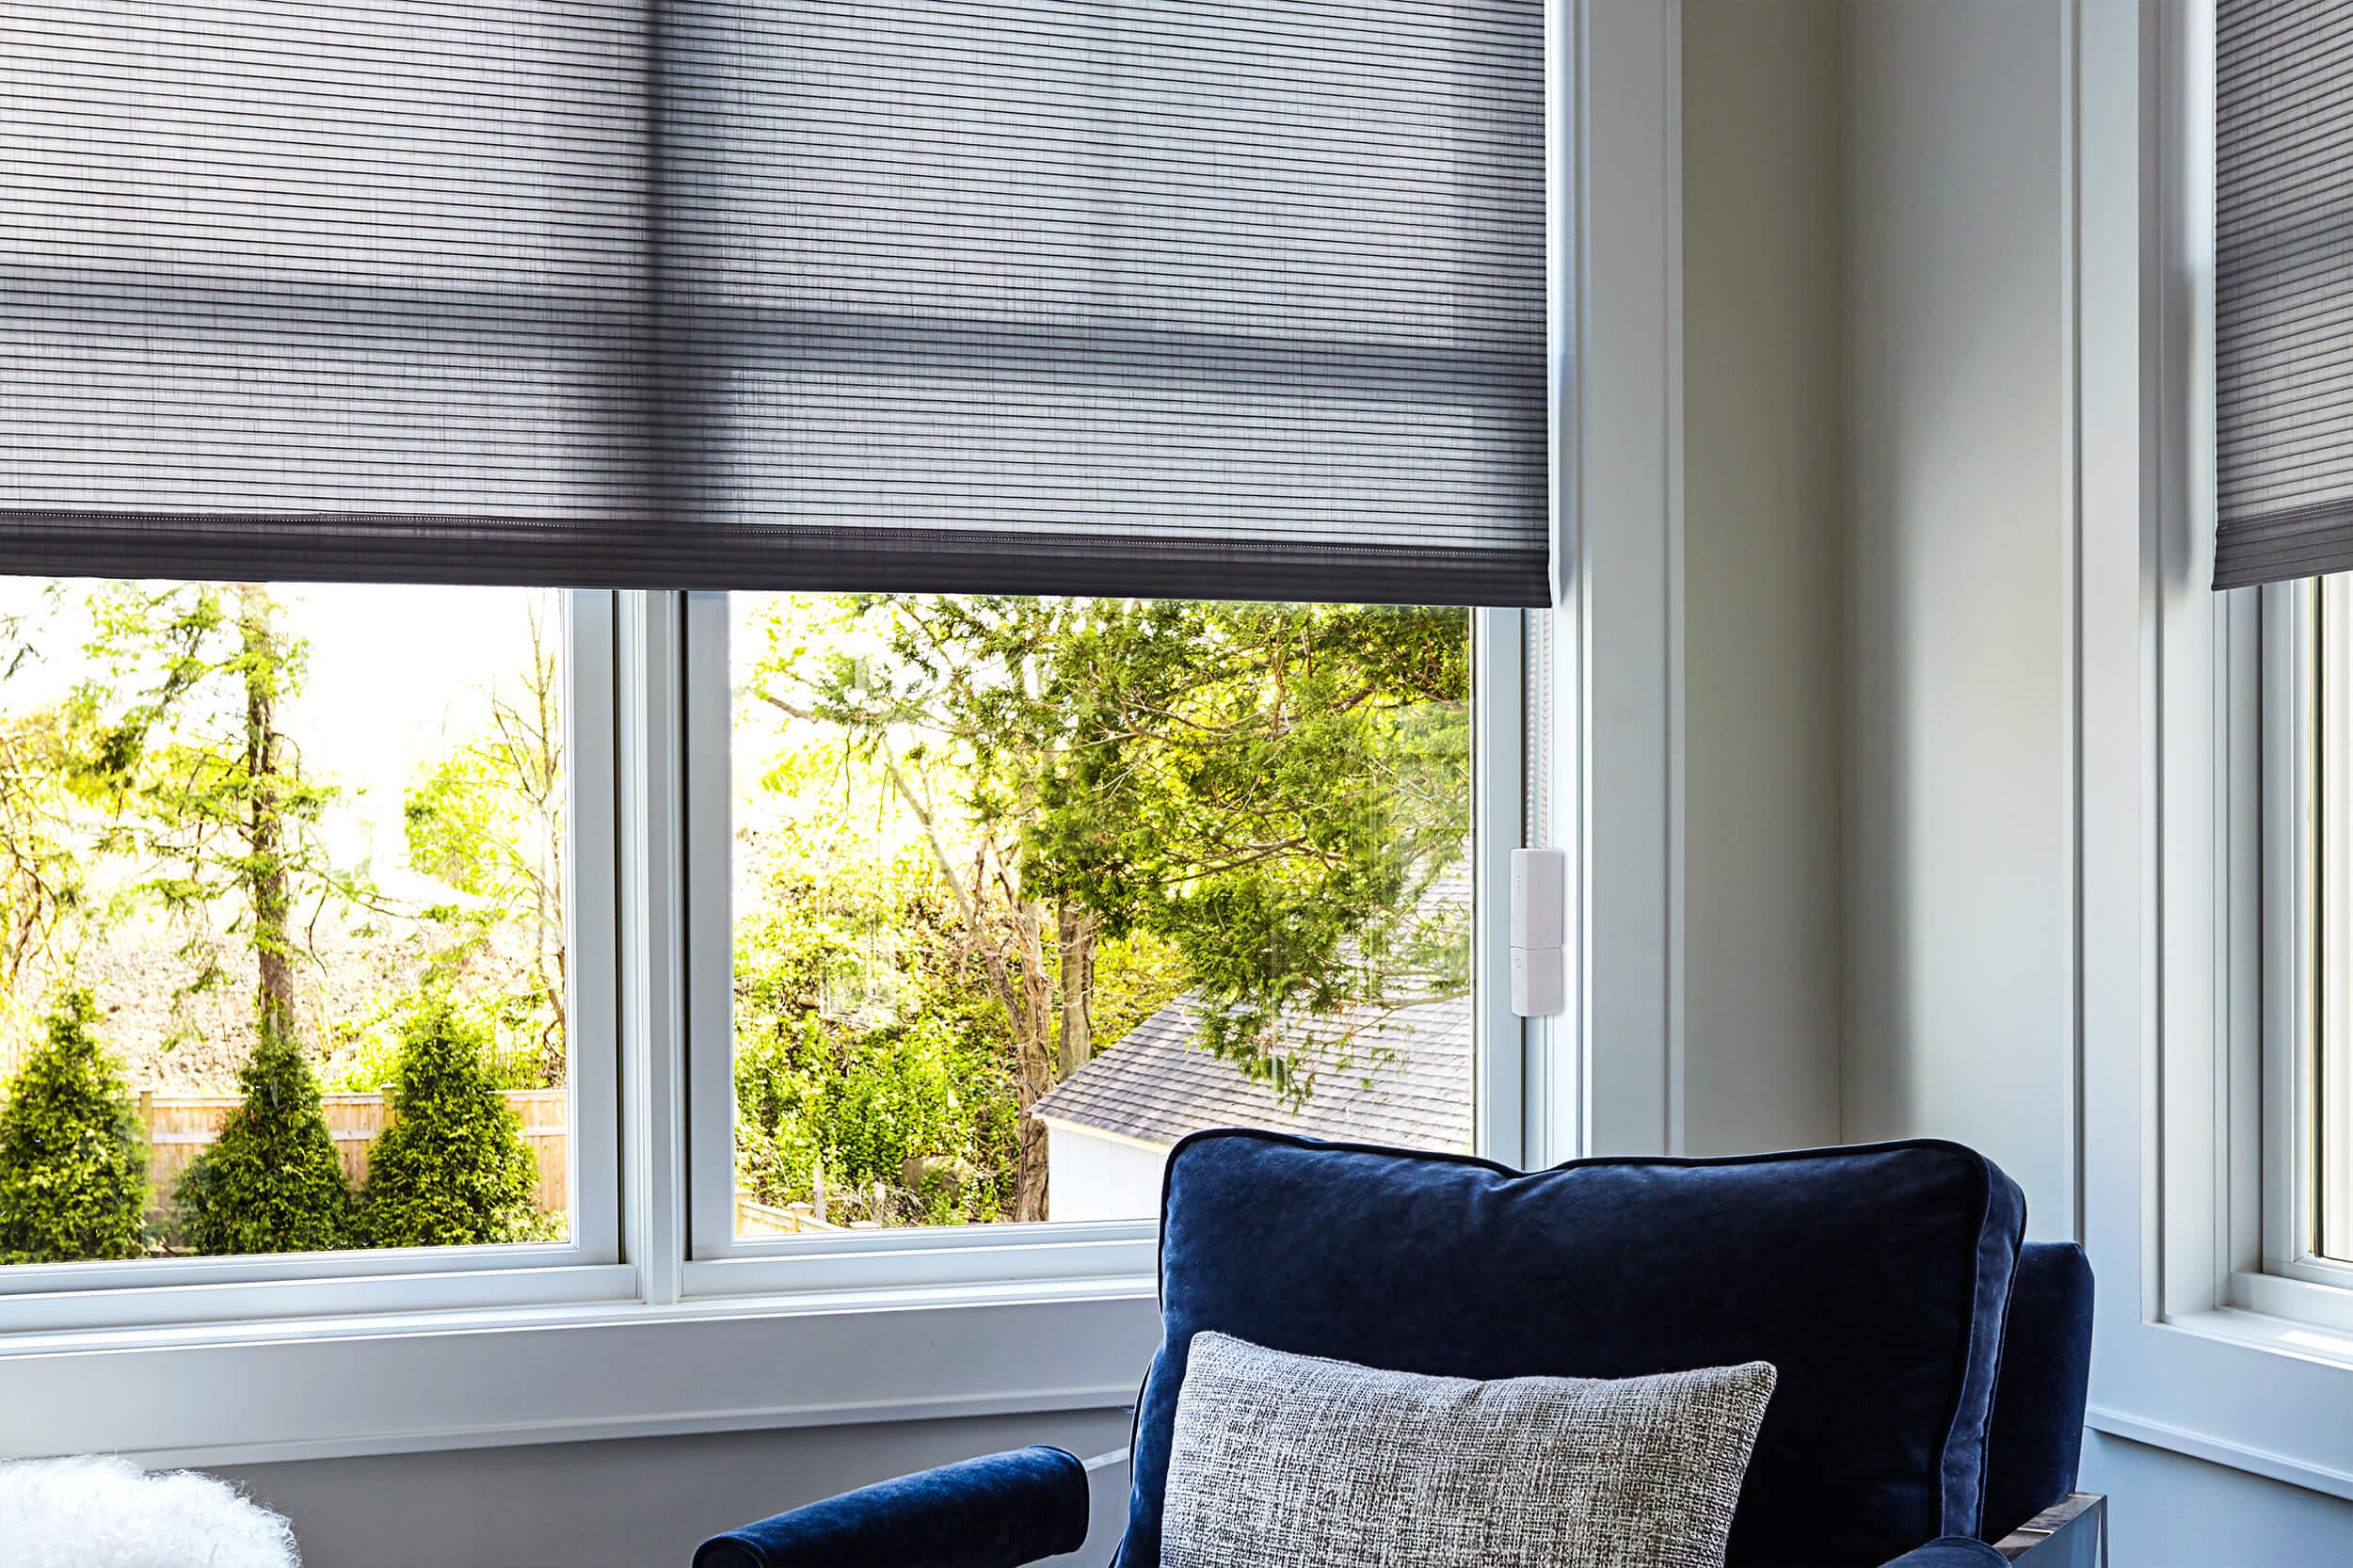 A large window in a contemporary living room features the MOVE unit for retrofitting your existing blinds and shades with motorization capabilities.